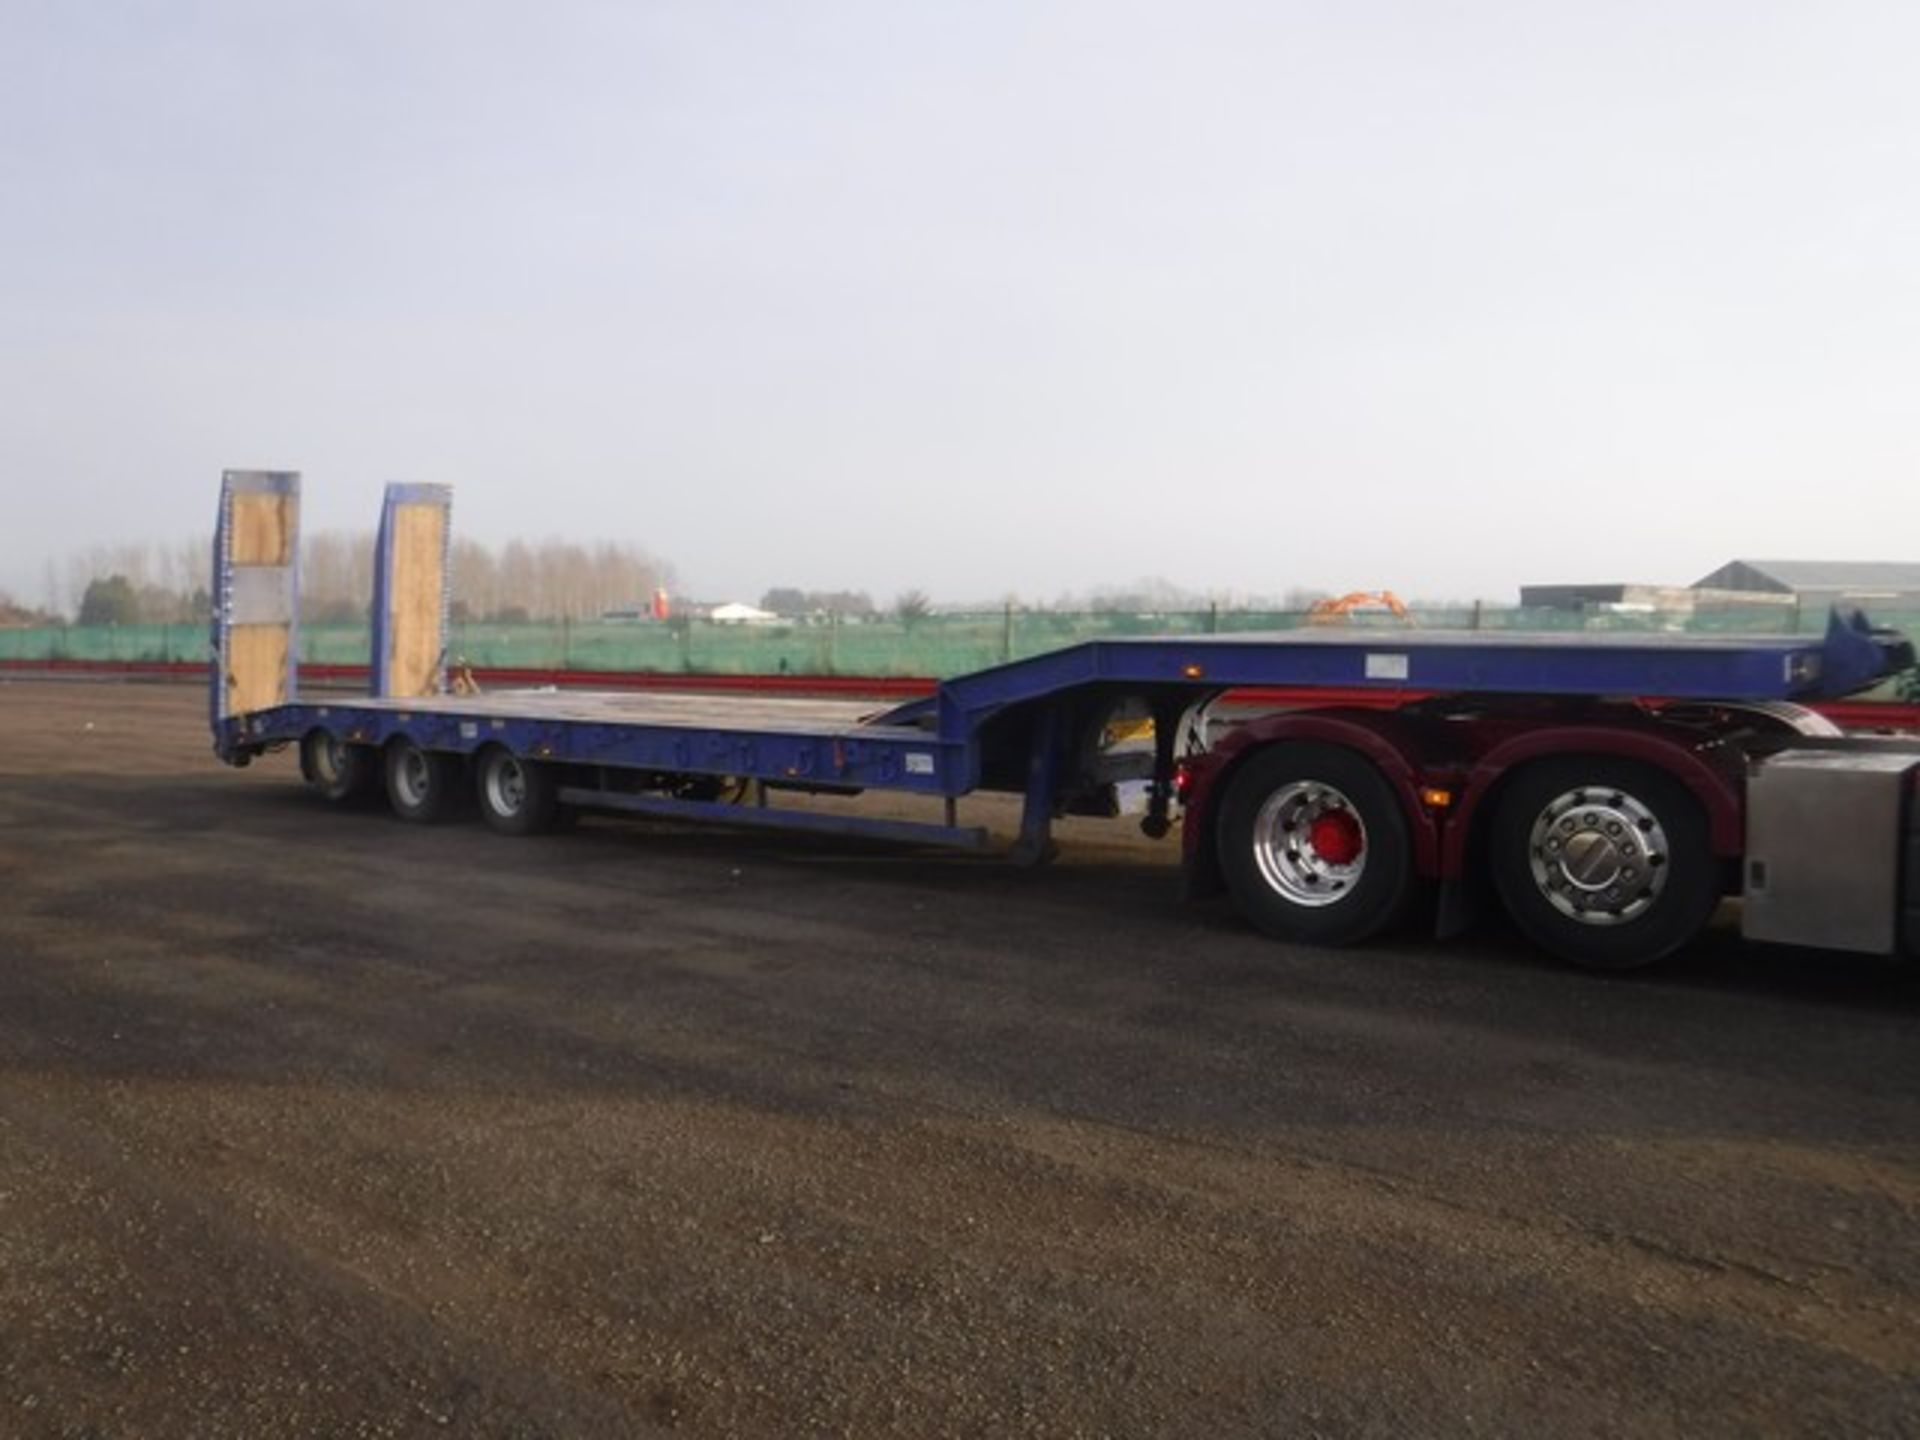 MACAULEY arctic low loader trailer c/w hydraulic ramps, winch & lifting equipment. 13.6m. - Image 4 of 6